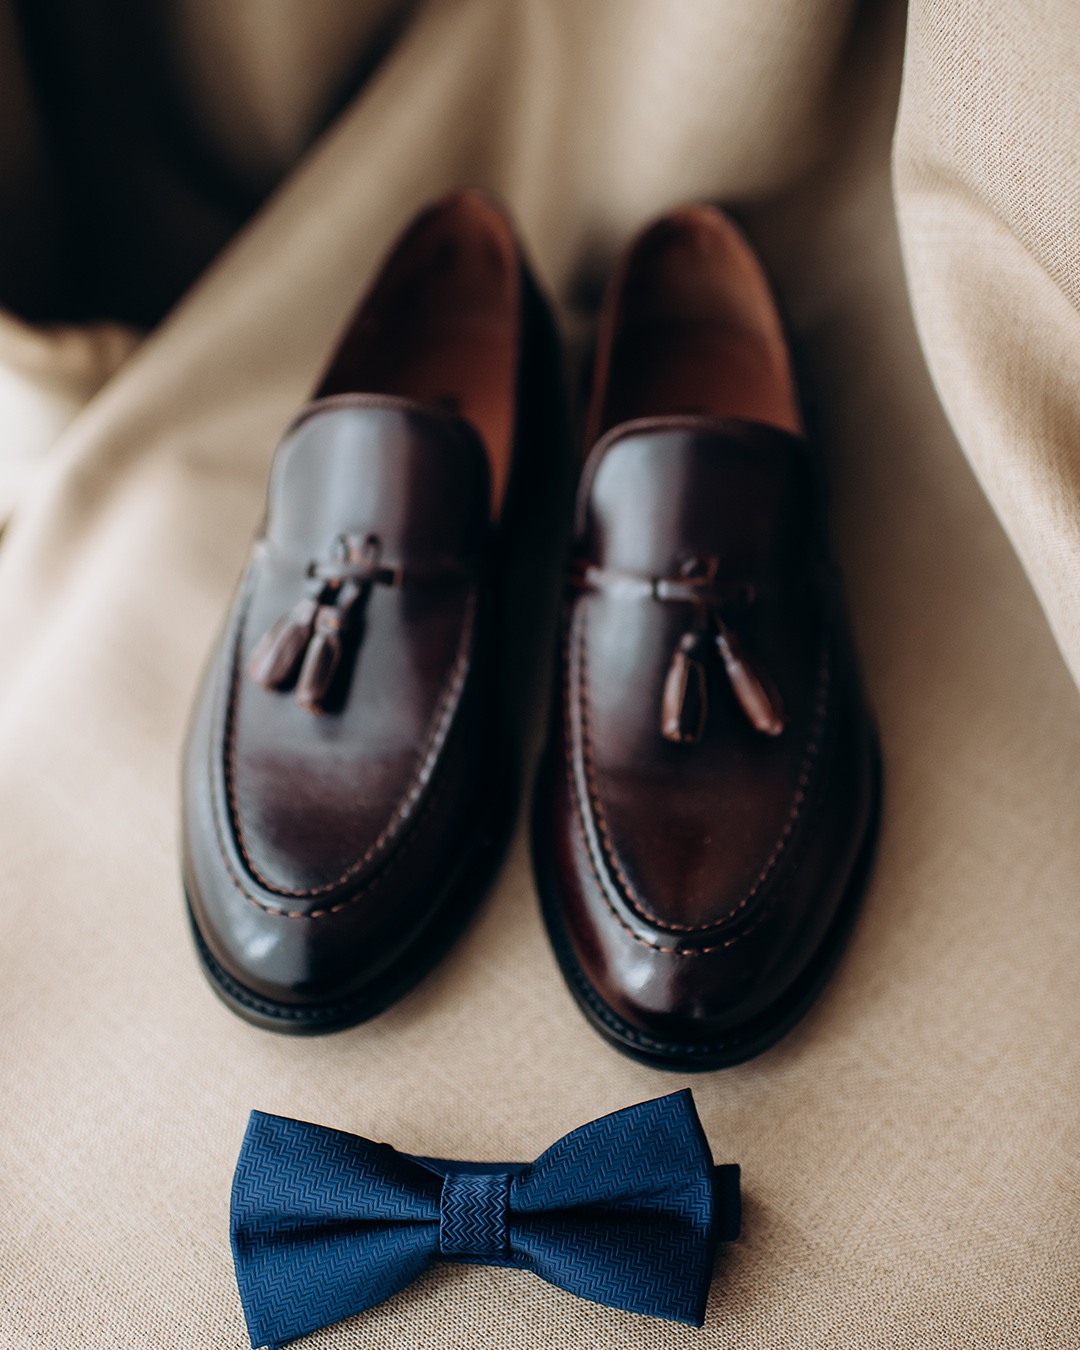 loafers mens wedding shoes brown for summer wedding shutterstock